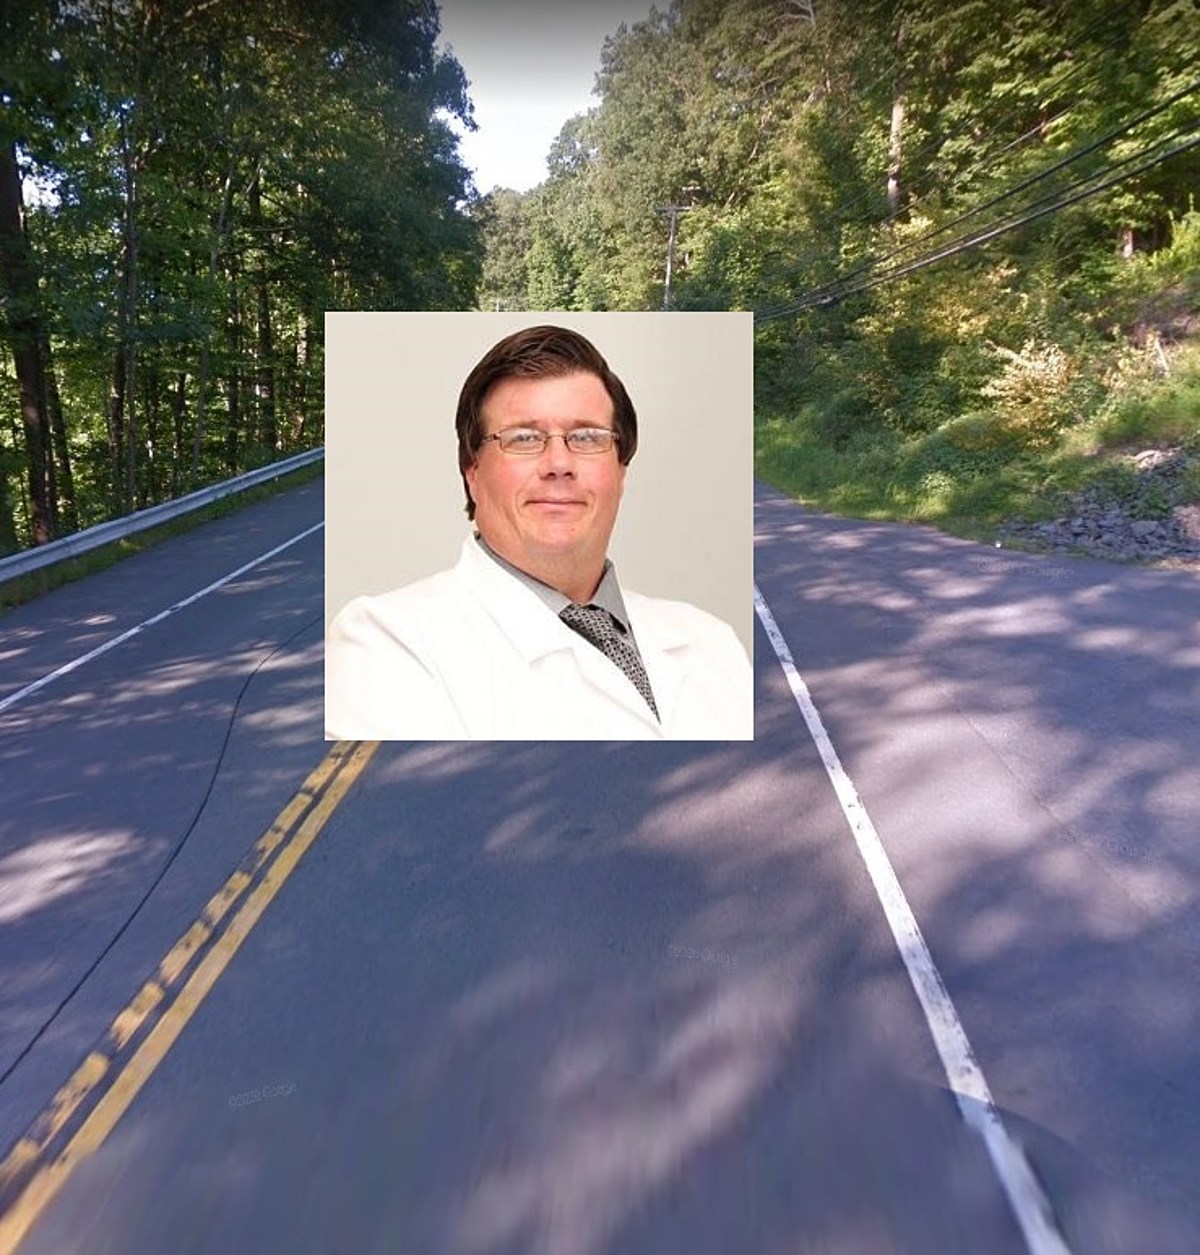 New York Doctor Killed in Head-On Hit-And-Run Hudson Valley Crash